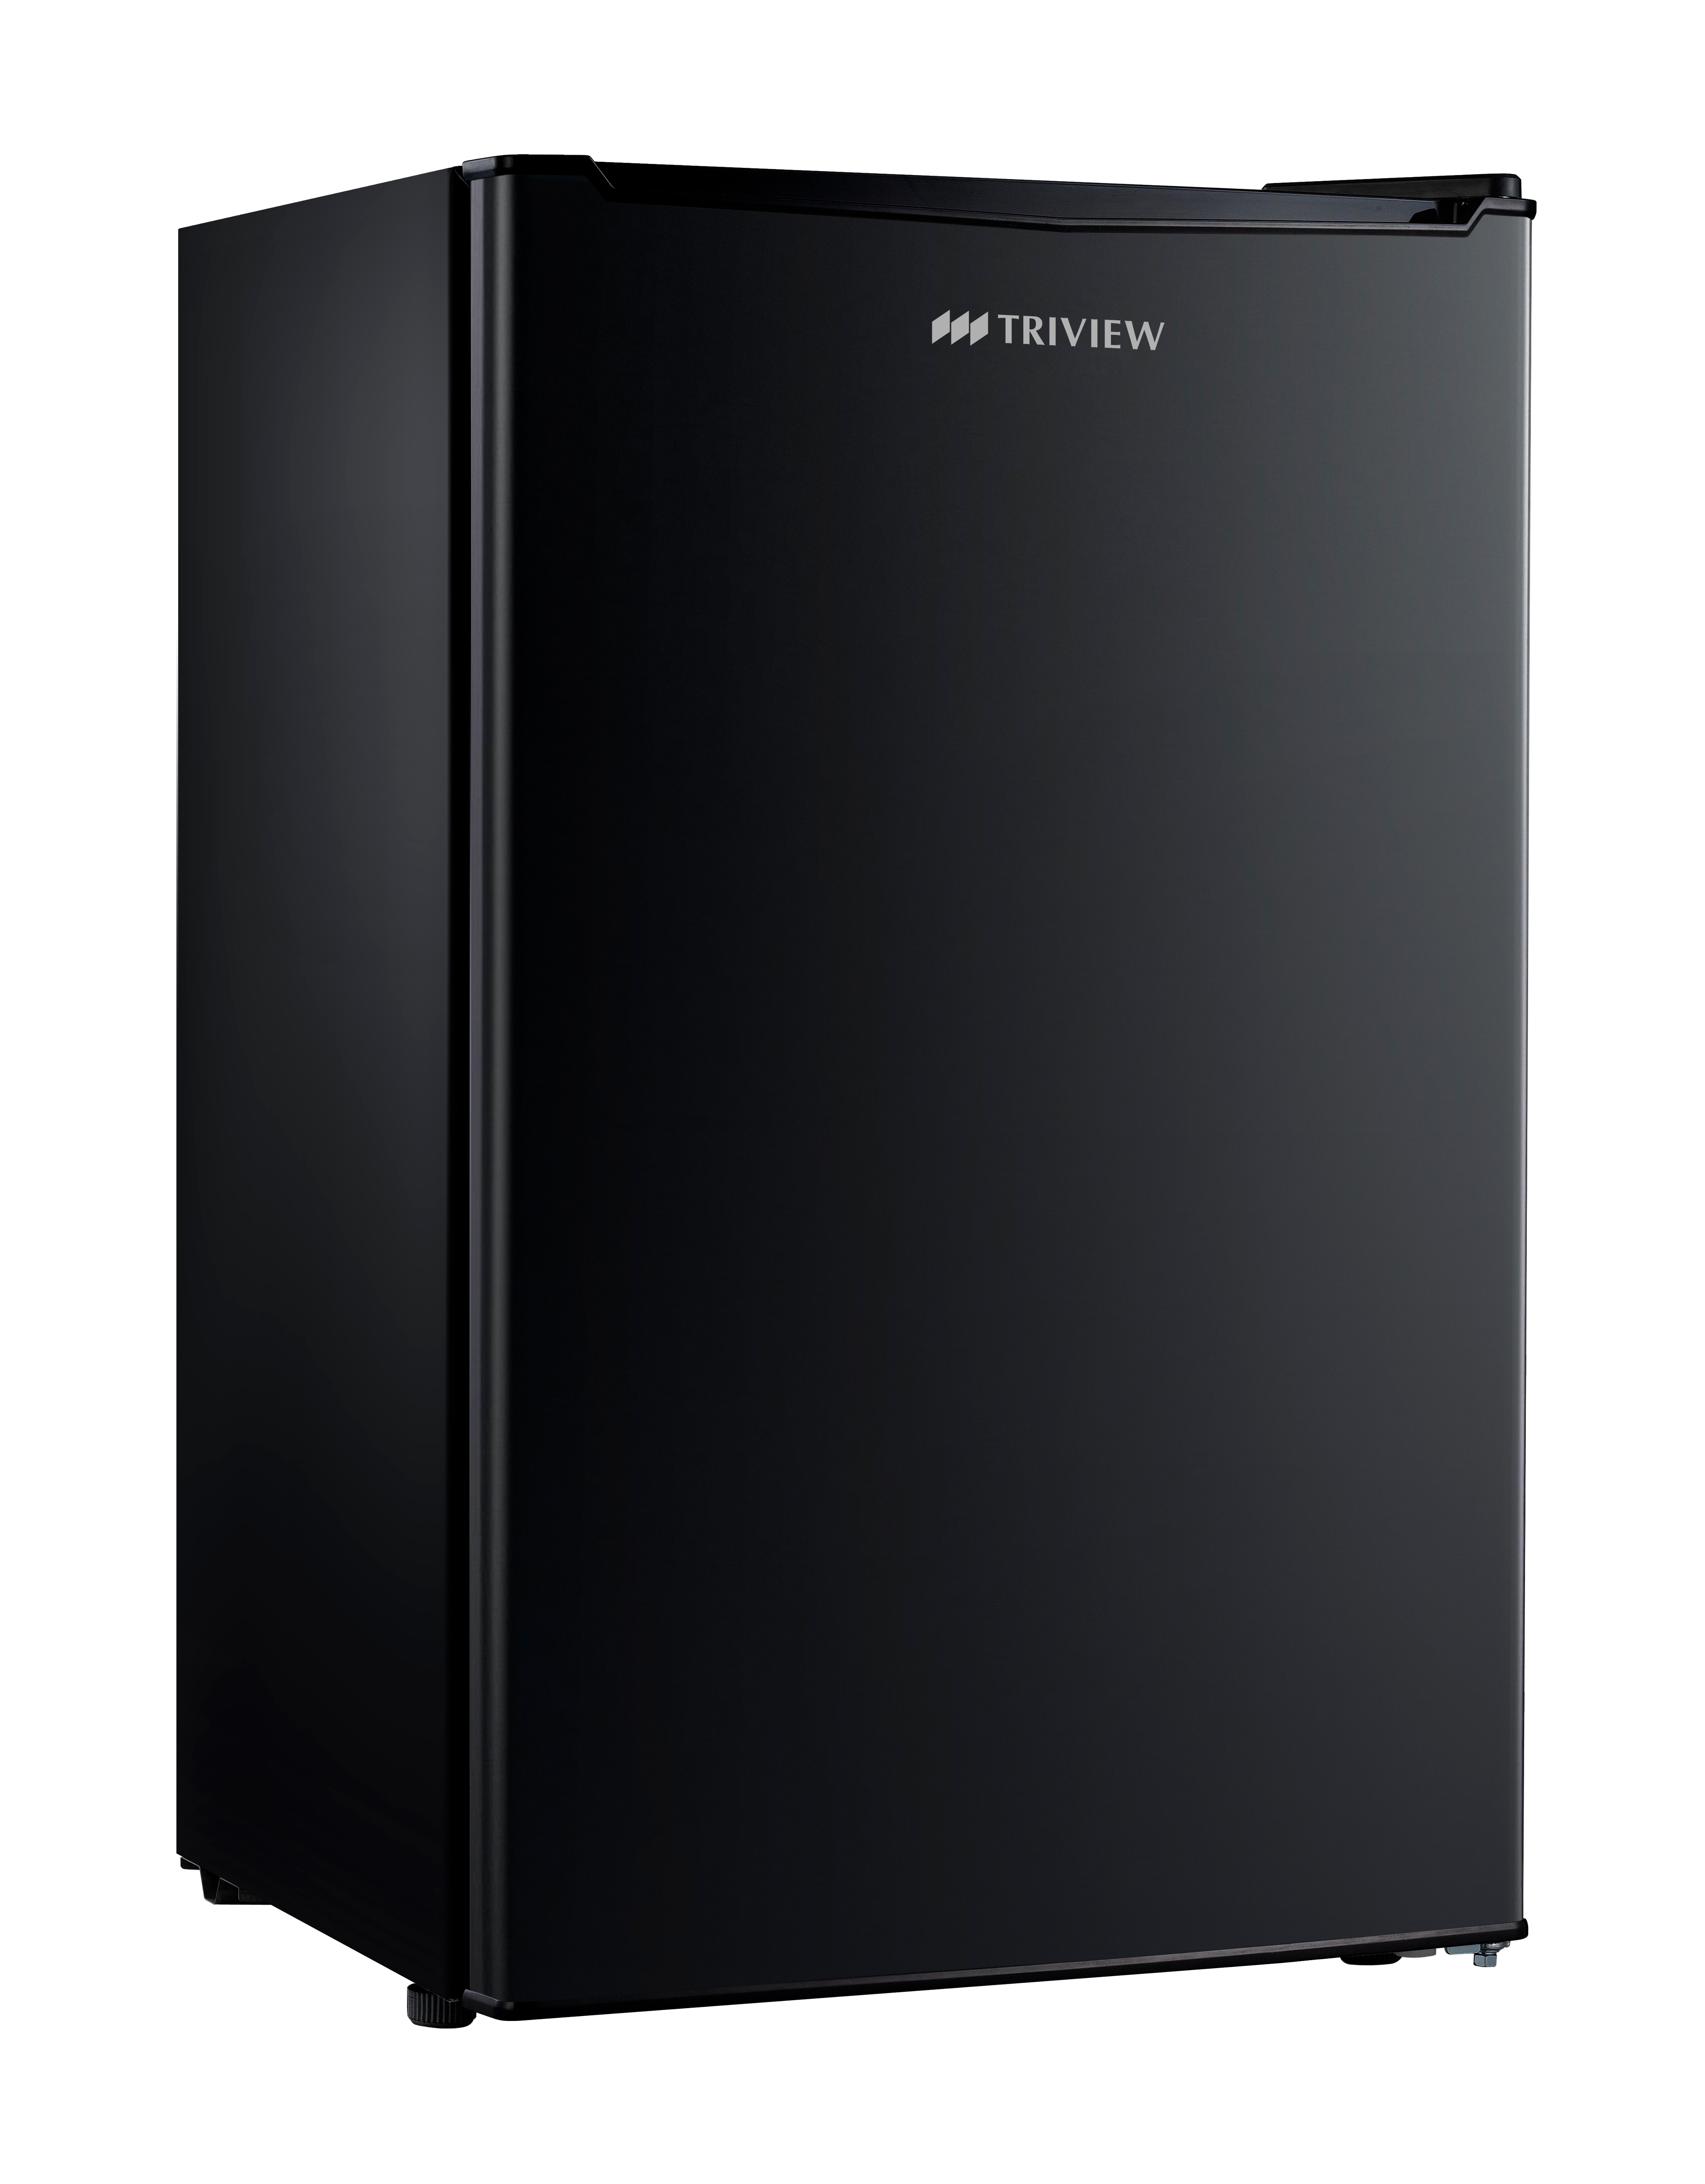 Triview (Tatung) 3.5 cu. Ft. Compact Refrigerator with Freezer Compartment